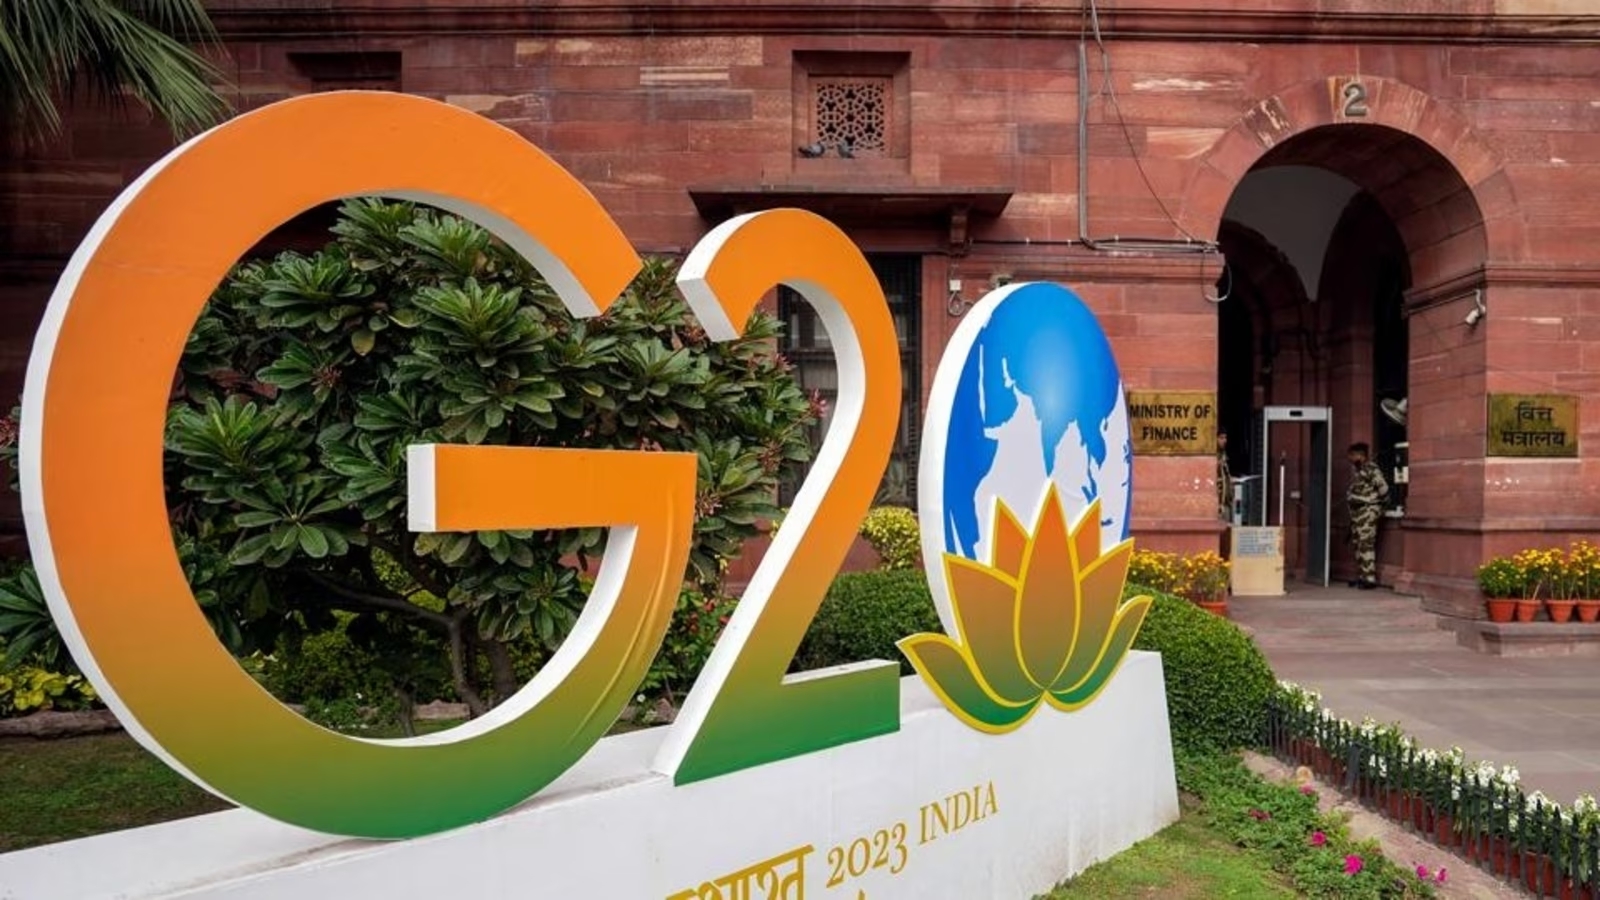 CRPF deployed to protect Heads of States during G20 Summit